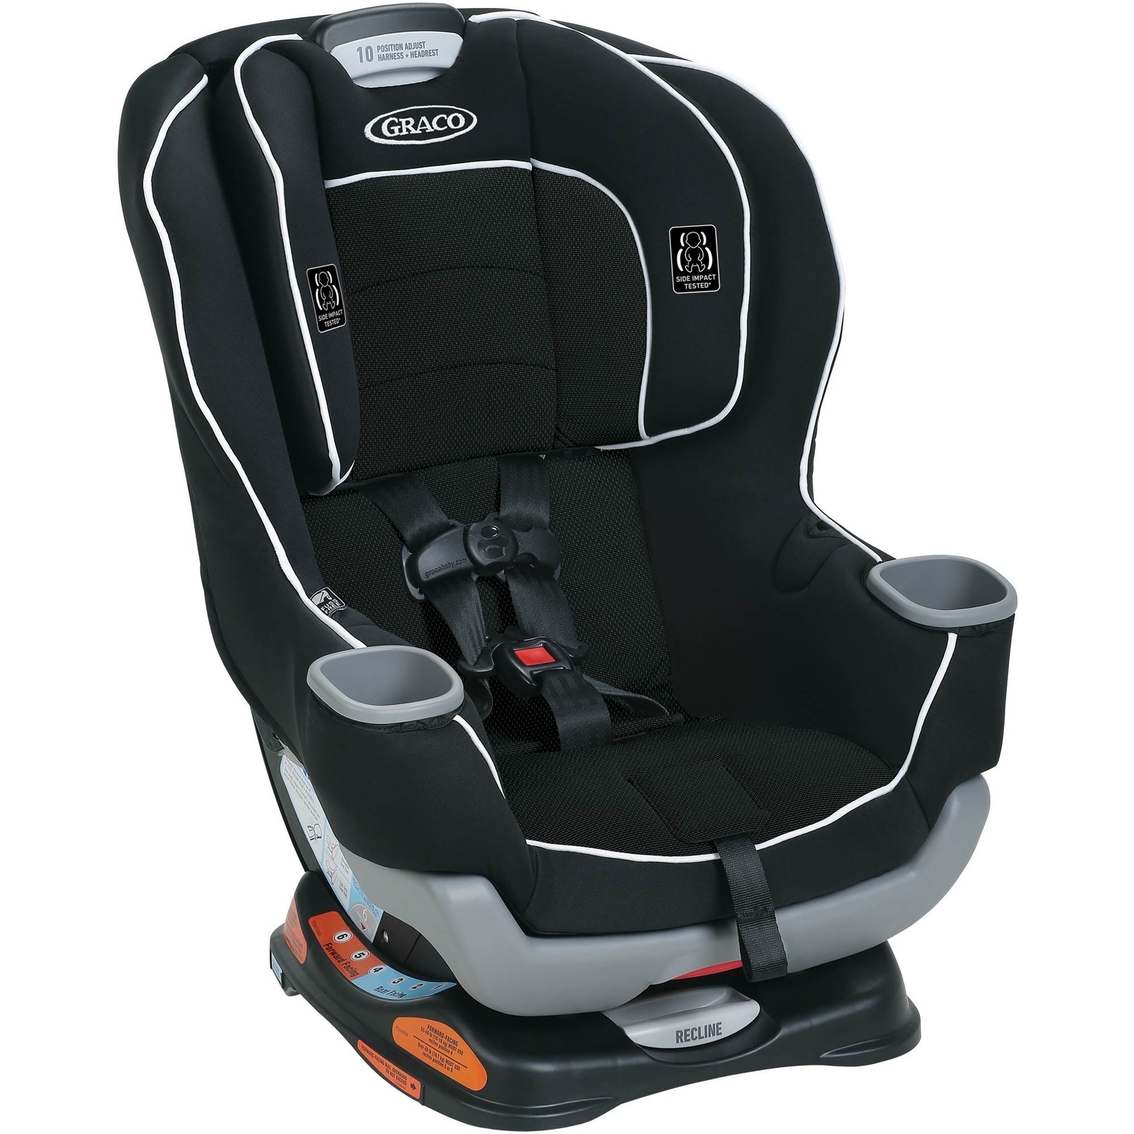 Graco Baby Extend2Fit Convertible Car Seat Infant Child Safety Binx NEW 